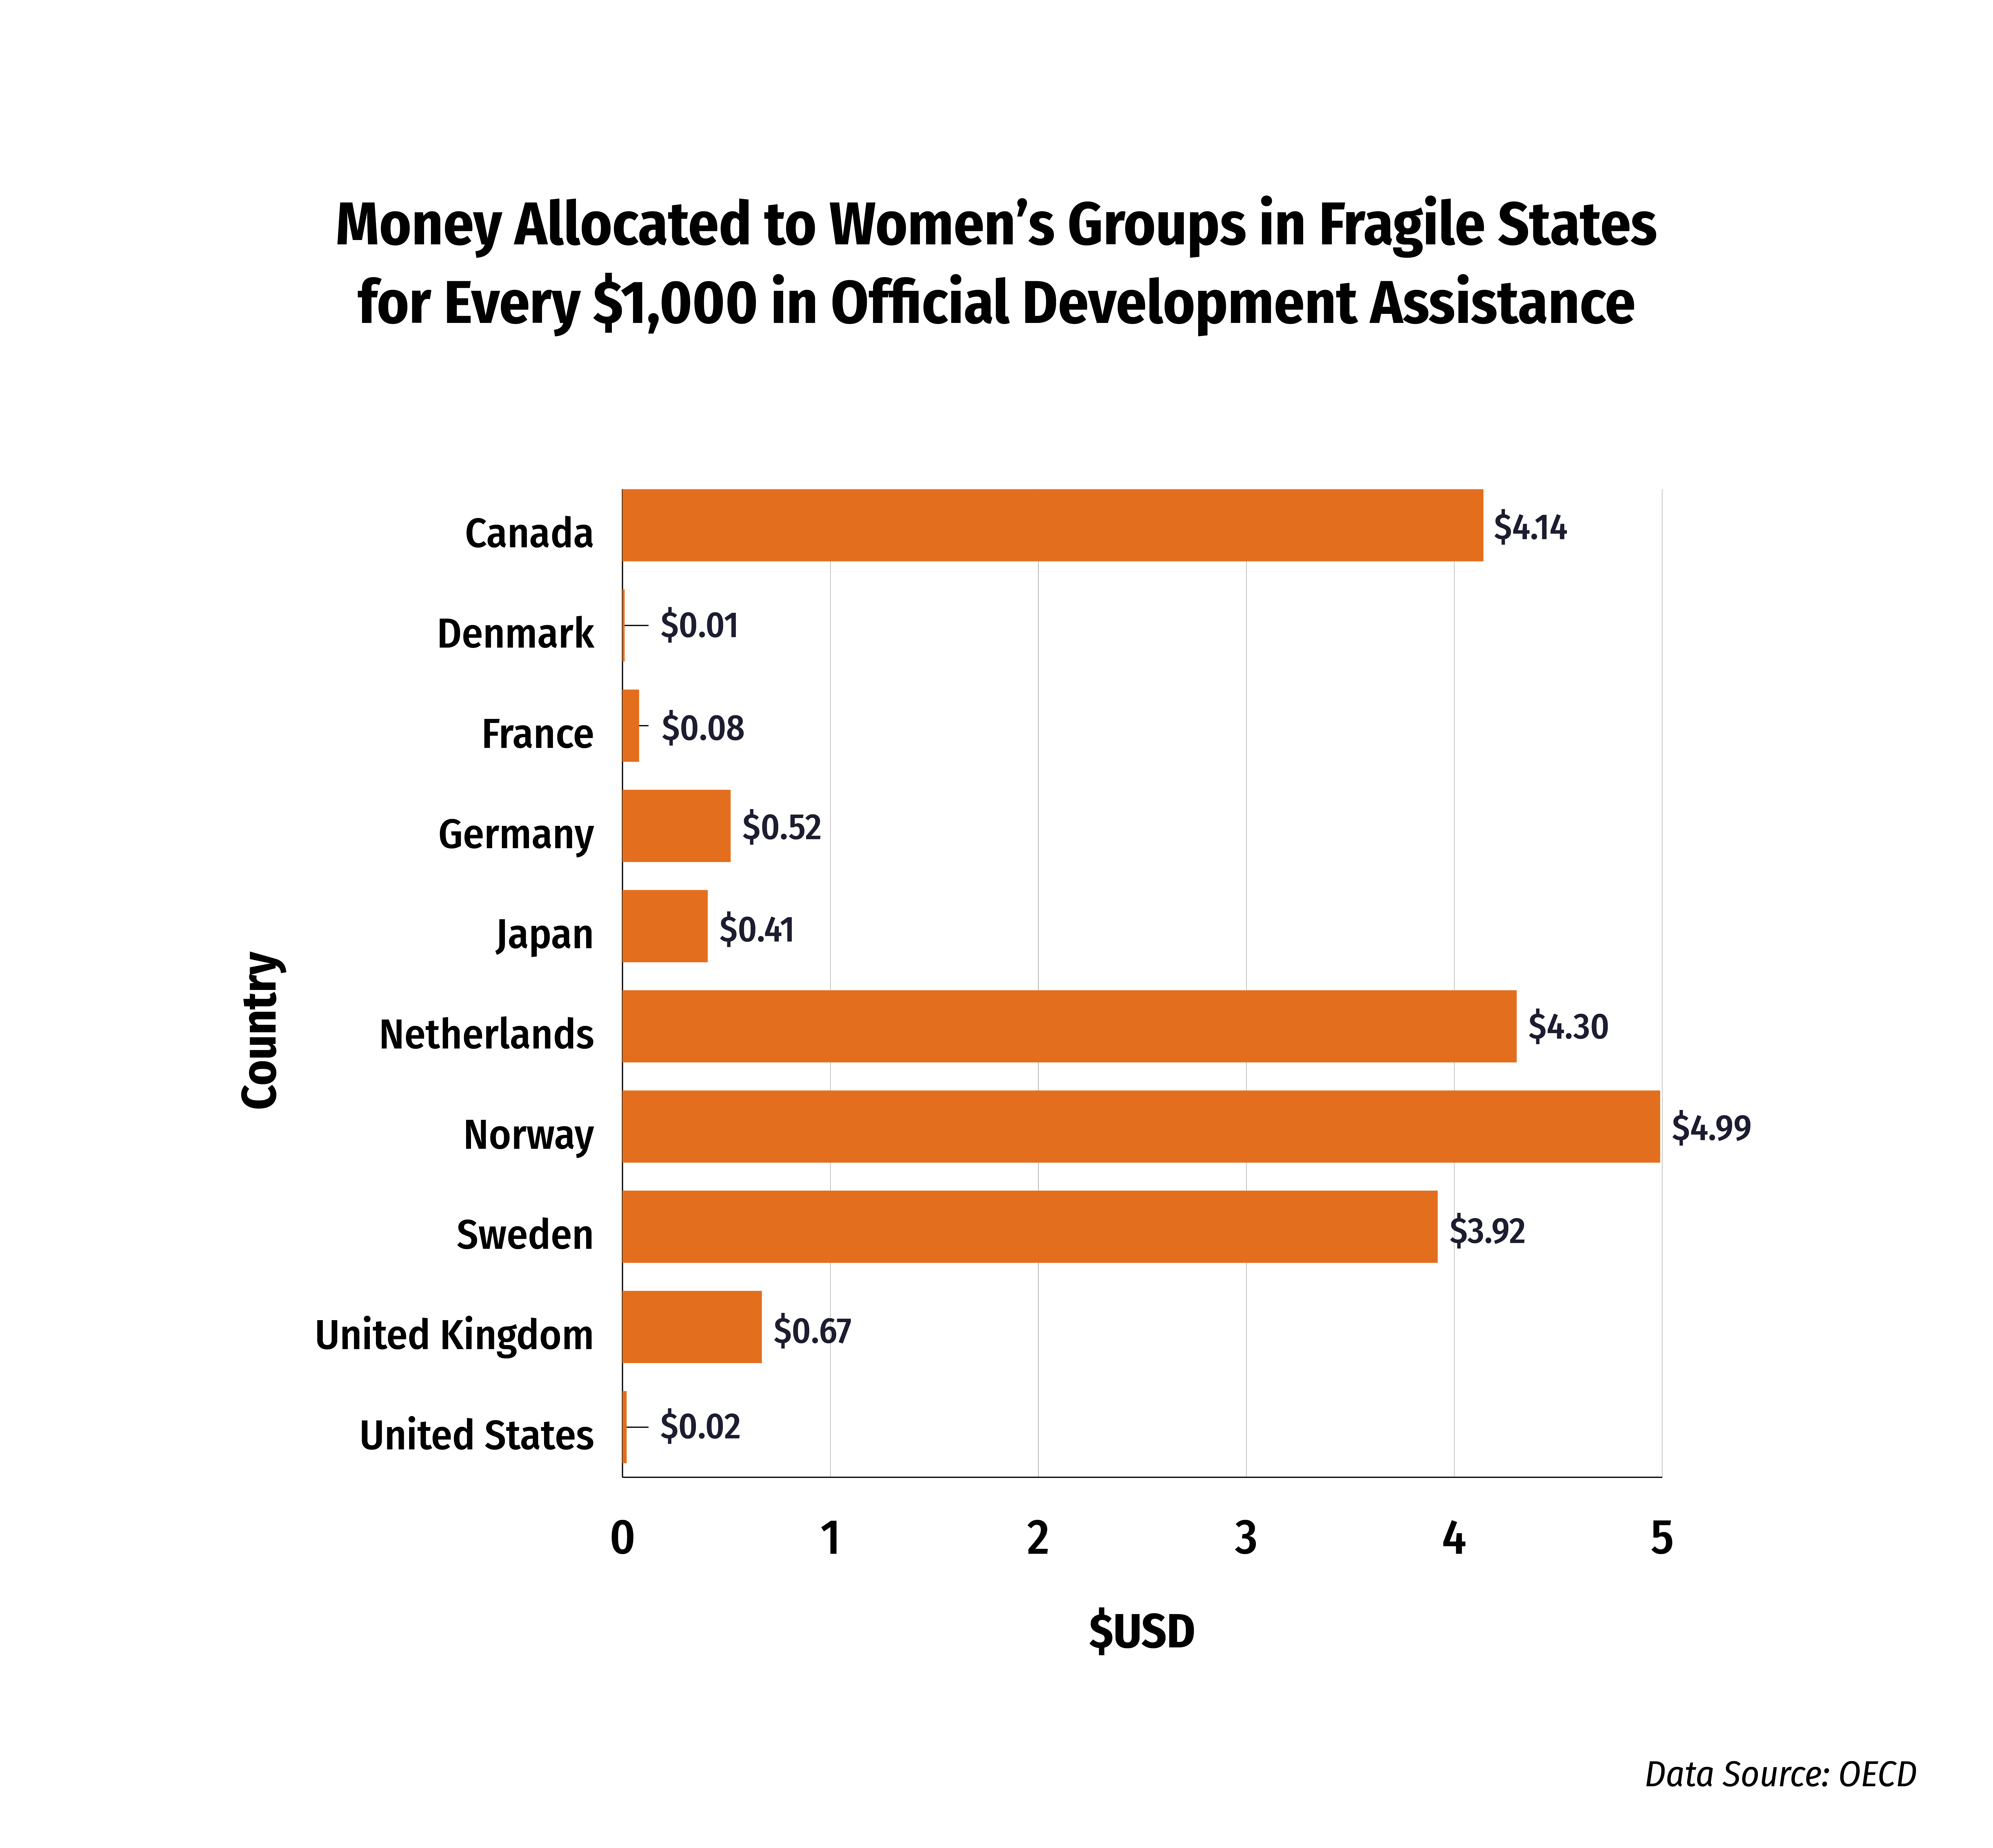 An infographic showing the amount of money allocated to women's groups in fragile states for every $1,000 in official development assistance.